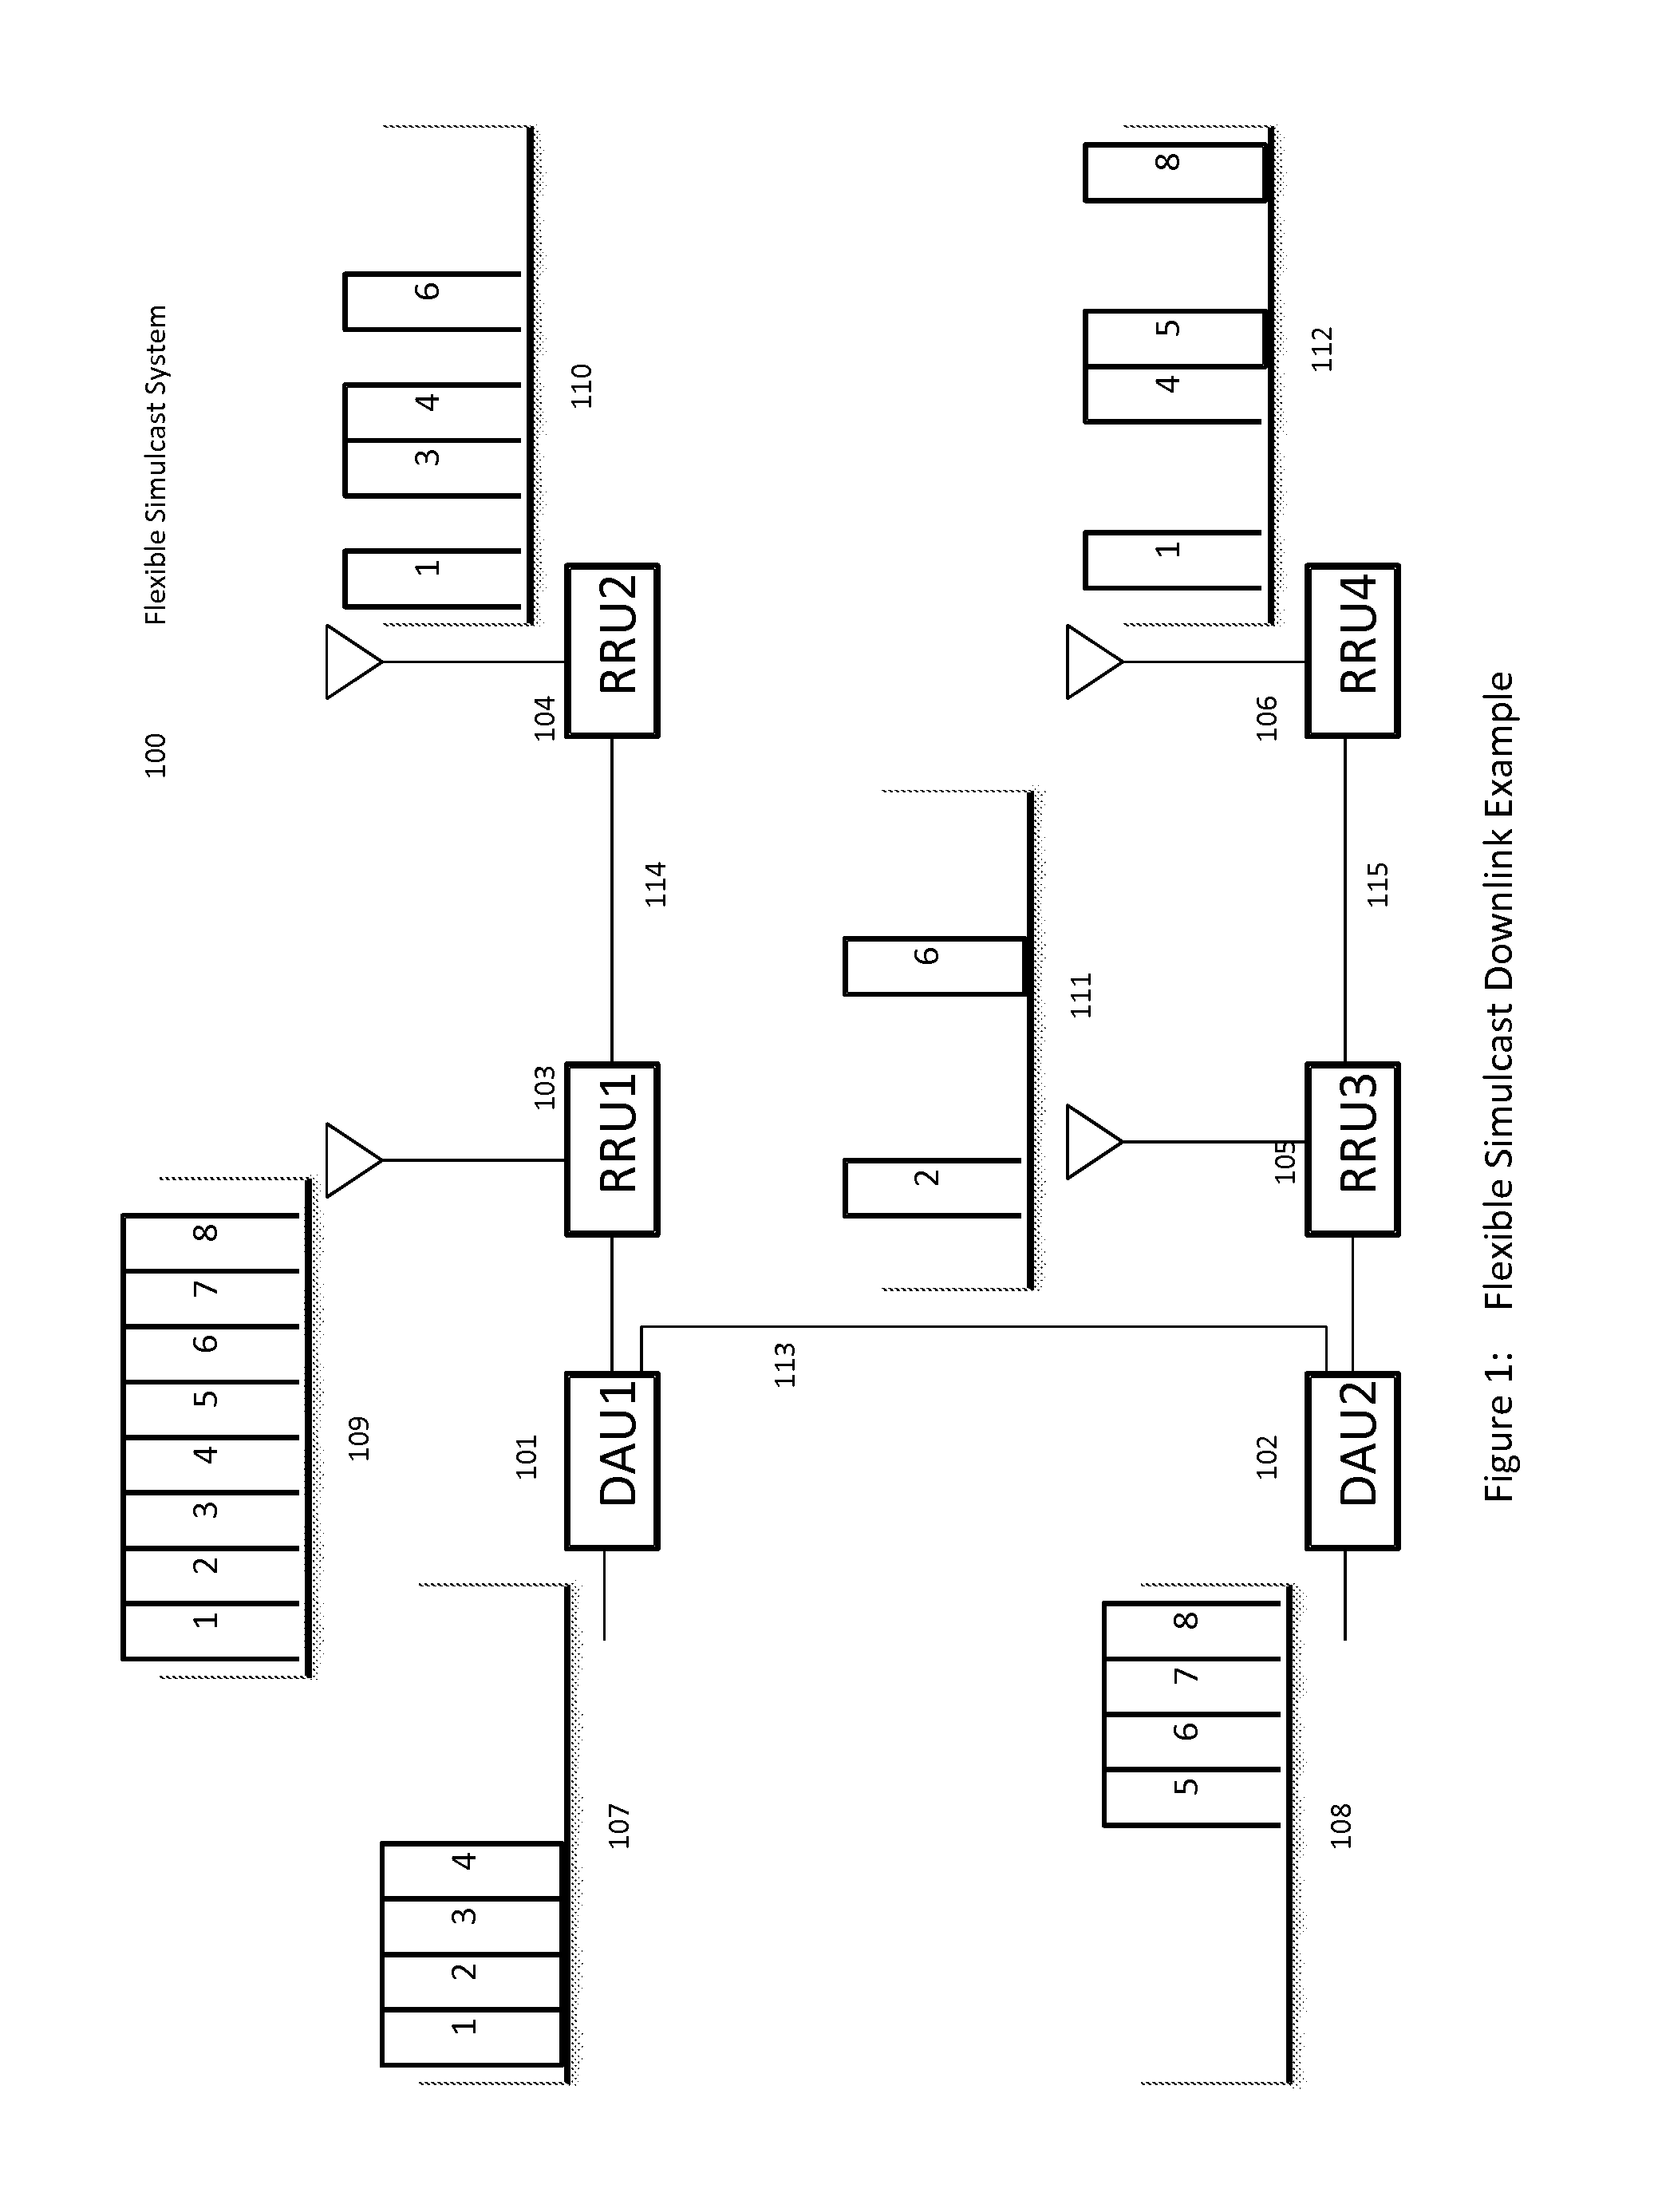 Remotely reconfigurable distributed antenna system and methods